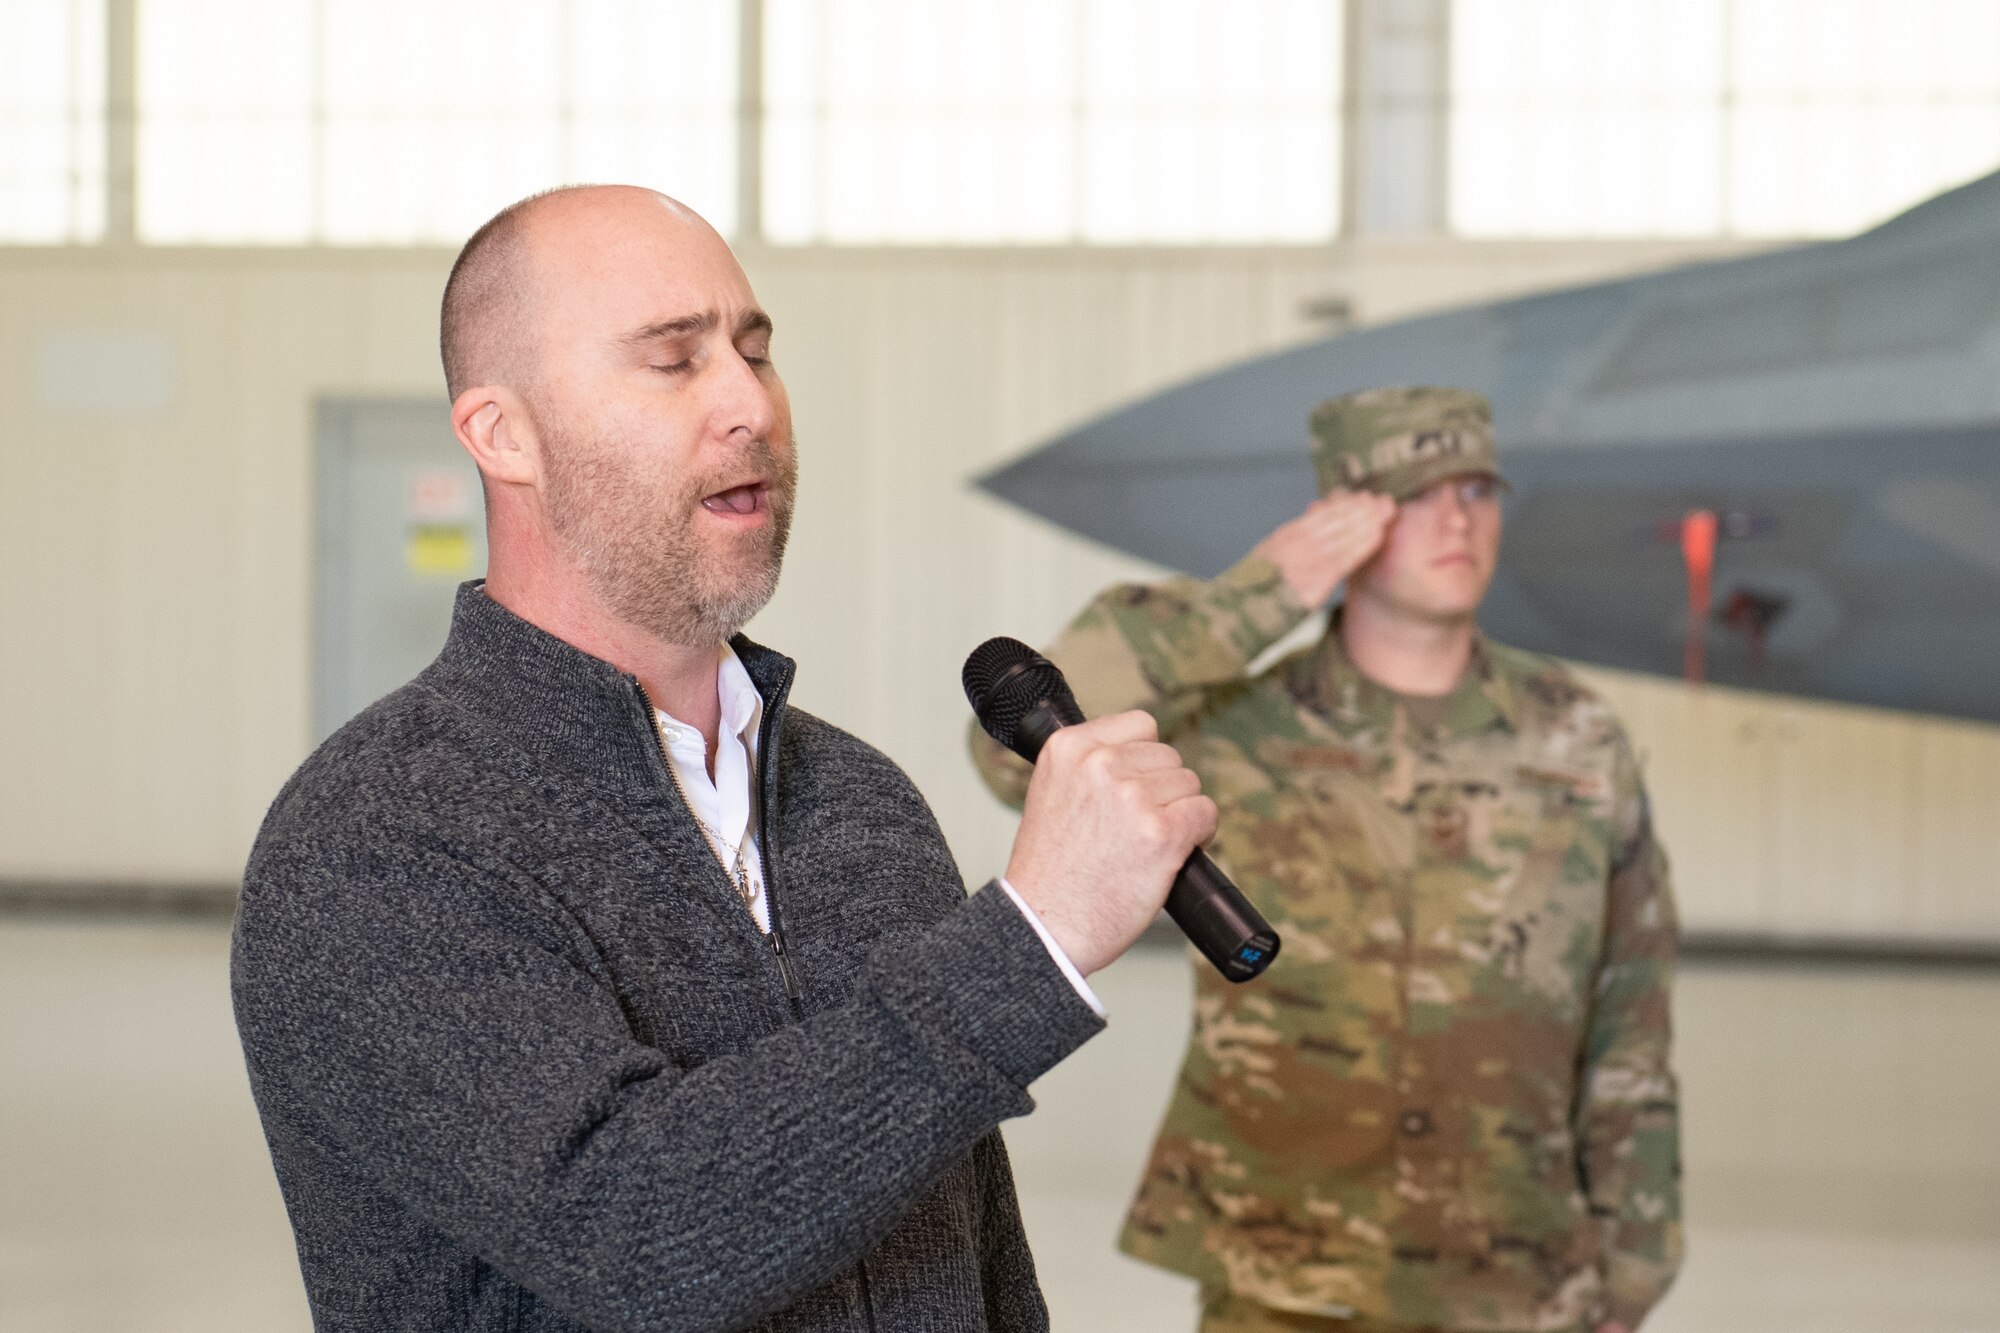 A man sings and an Airman salutes